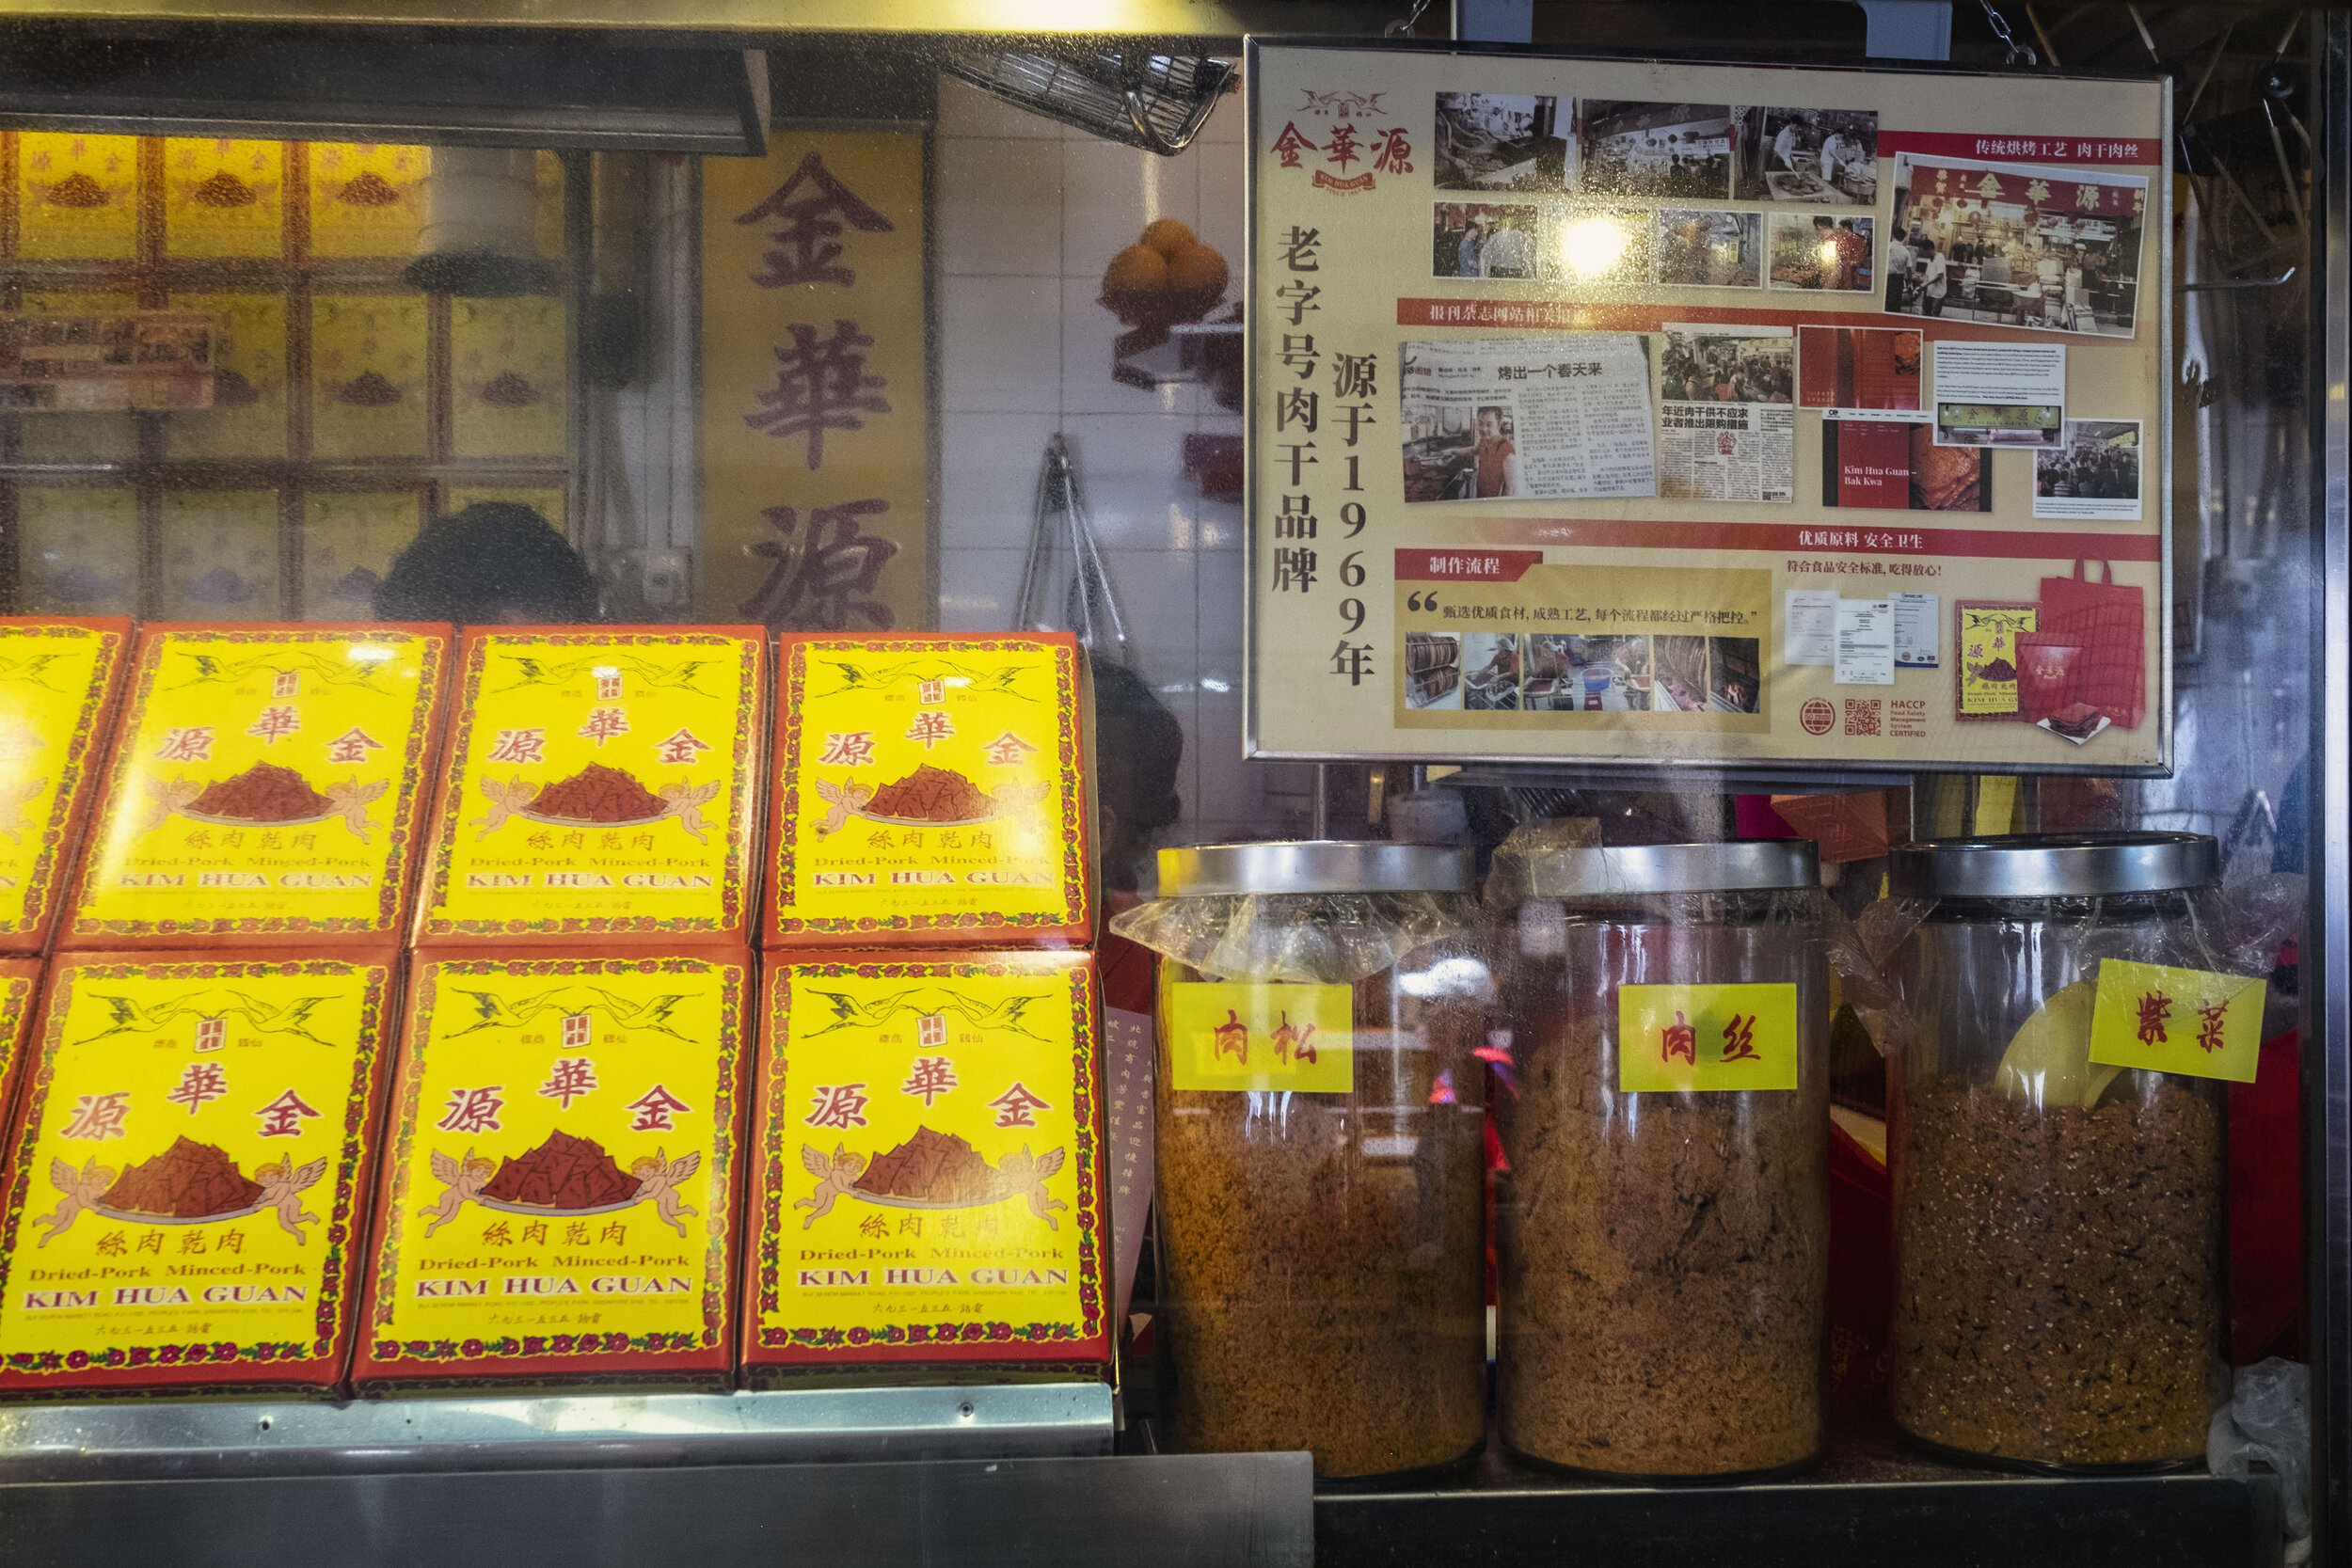  Jars of various types of meat floss and boxes for Bak Kwa are displayed at the front of the stall 